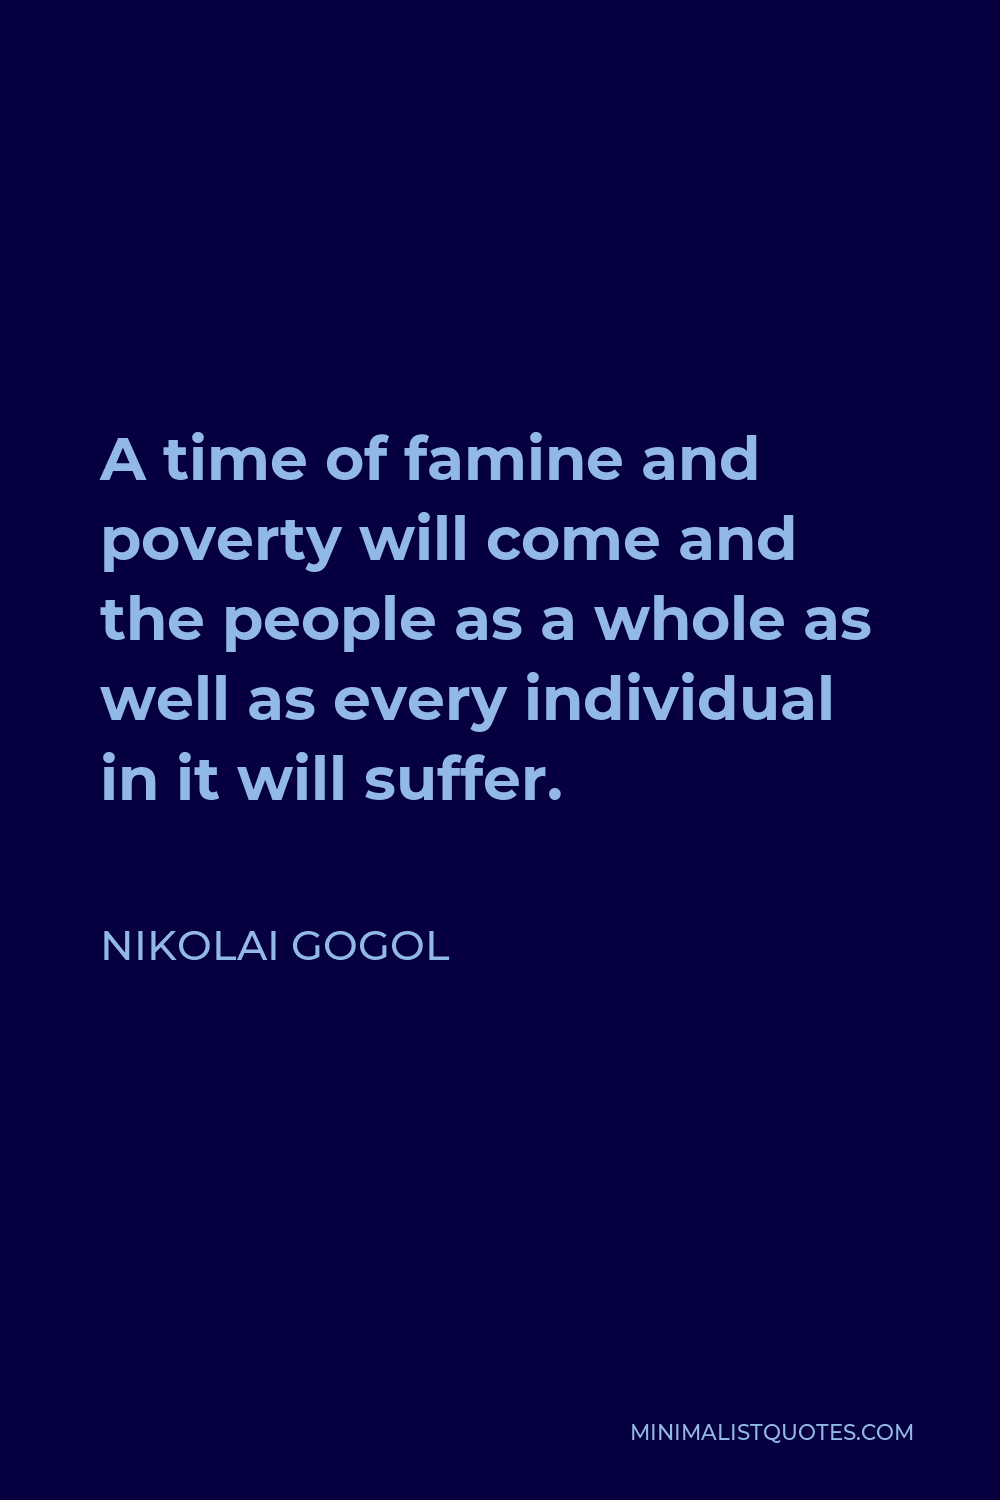 Nikolai Gogol Quote - A time of famine and poverty will come and the people as a whole as well as every individual in it will suffer.